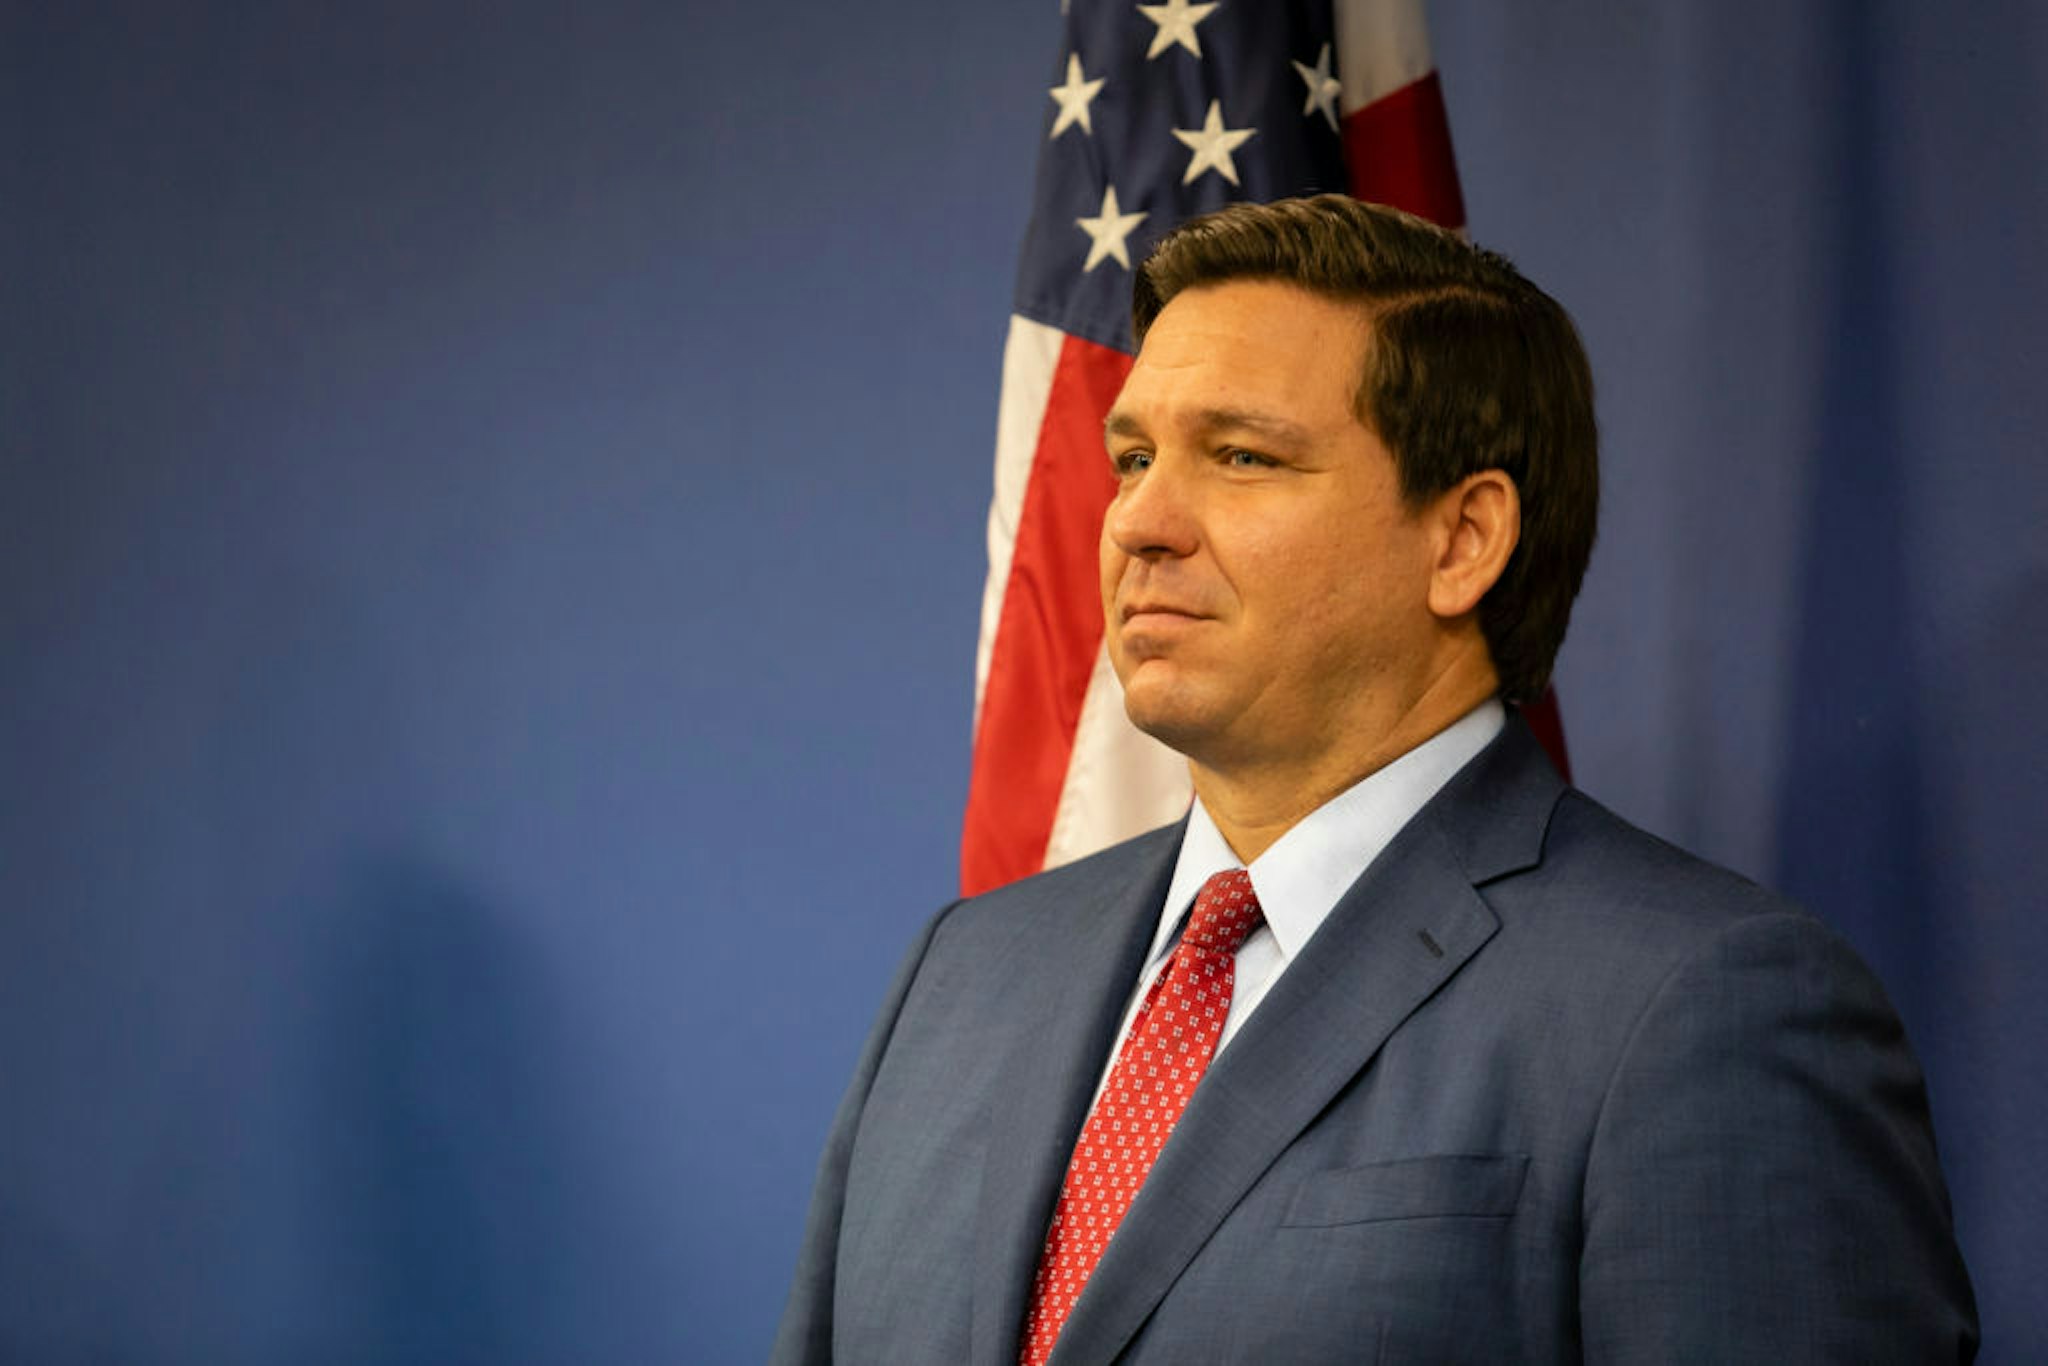 MIAMI, FL - JUNE 08: Florida Governor Ron DeSantis is seen during a press conference relating hurricane season updates at the Miami-Dade Emergency Operations Center on June 8, 2020 in Miami, Florida. NOAA has predicted that this year's Atlantic hurricane season will be more active than usual with up to 19 named storms and 6 major hurricanes possible. (Photo by Eva Marie Uzcategui/Getty Images)